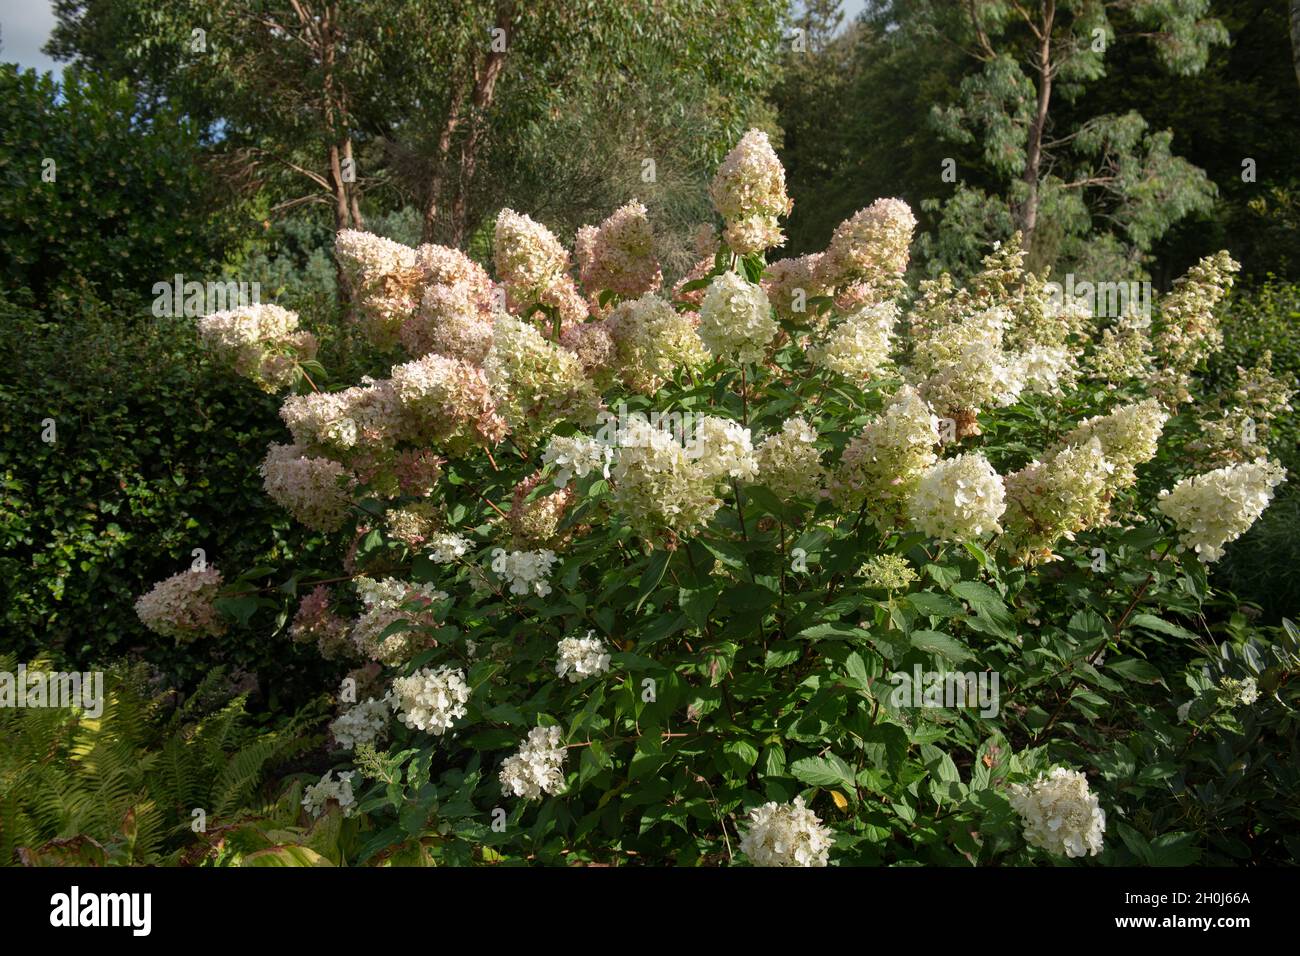 Autumnal Landscape of the Fading Cream Flower Heads on a Panicled Hydrangea Shrub (Hydrangea paniculata 'White Moth') Growing in a Garden Stock Photo